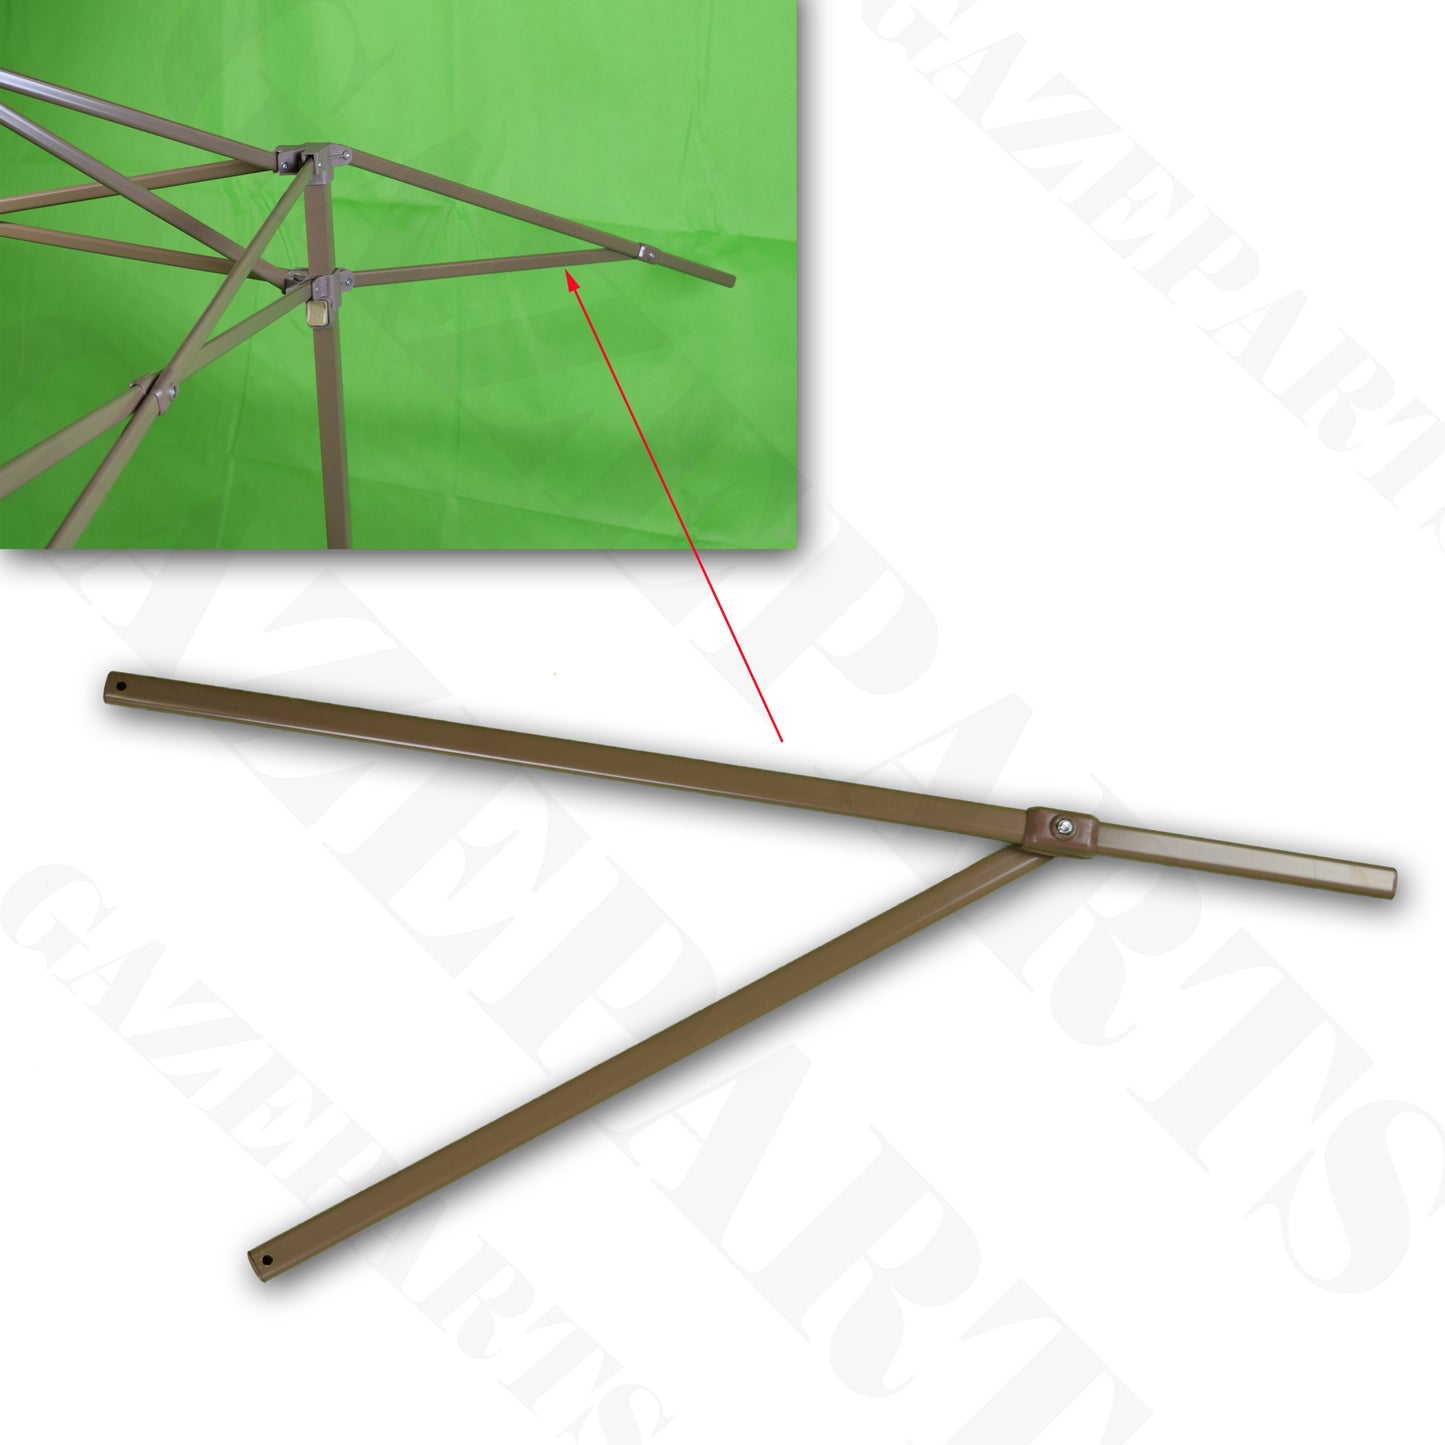  This photo displays the Chapter 13 x 13 Pagoda Canopy Gazebo EXTEND LOWER ROOF POLE Bars, which are essential Canopy Replacement Parts. These extended lower roof pole bars are designed to enhance the structural support of your gazebo canopy, ensuring a secure and stable outdoor shelter. Their inclusion helps to maintain the overall integrity of the canopy and can be particularly useful for larger gatherings or events.